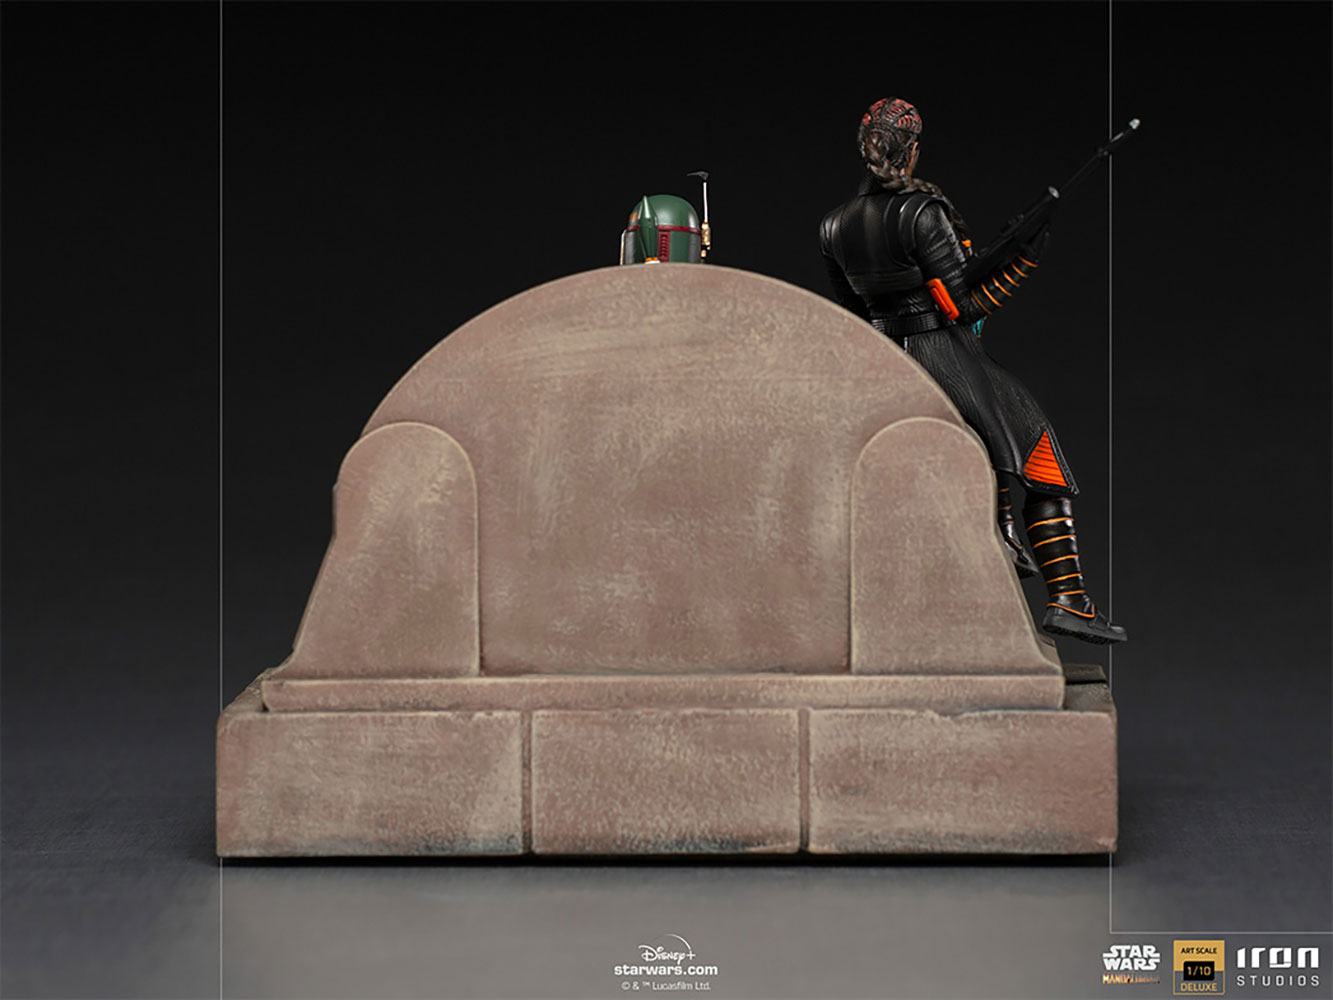 TBOBF Boba Fett & Fennec Shand on Throne Deluxe 1:10 Scale Statue 4